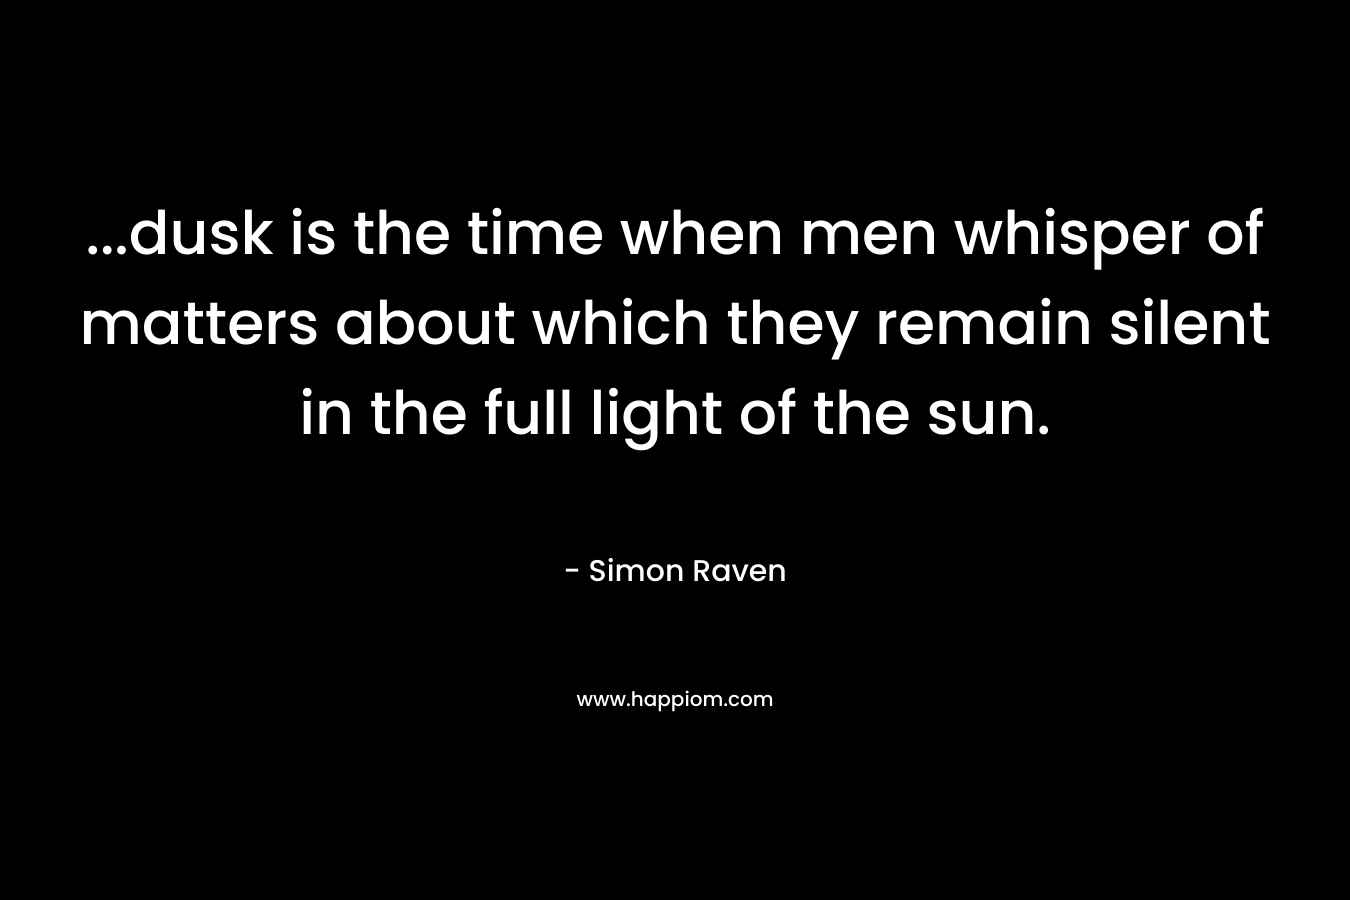 …dusk is the time when men whisper of matters about which they remain silent in the full light of the sun. – Simon Raven